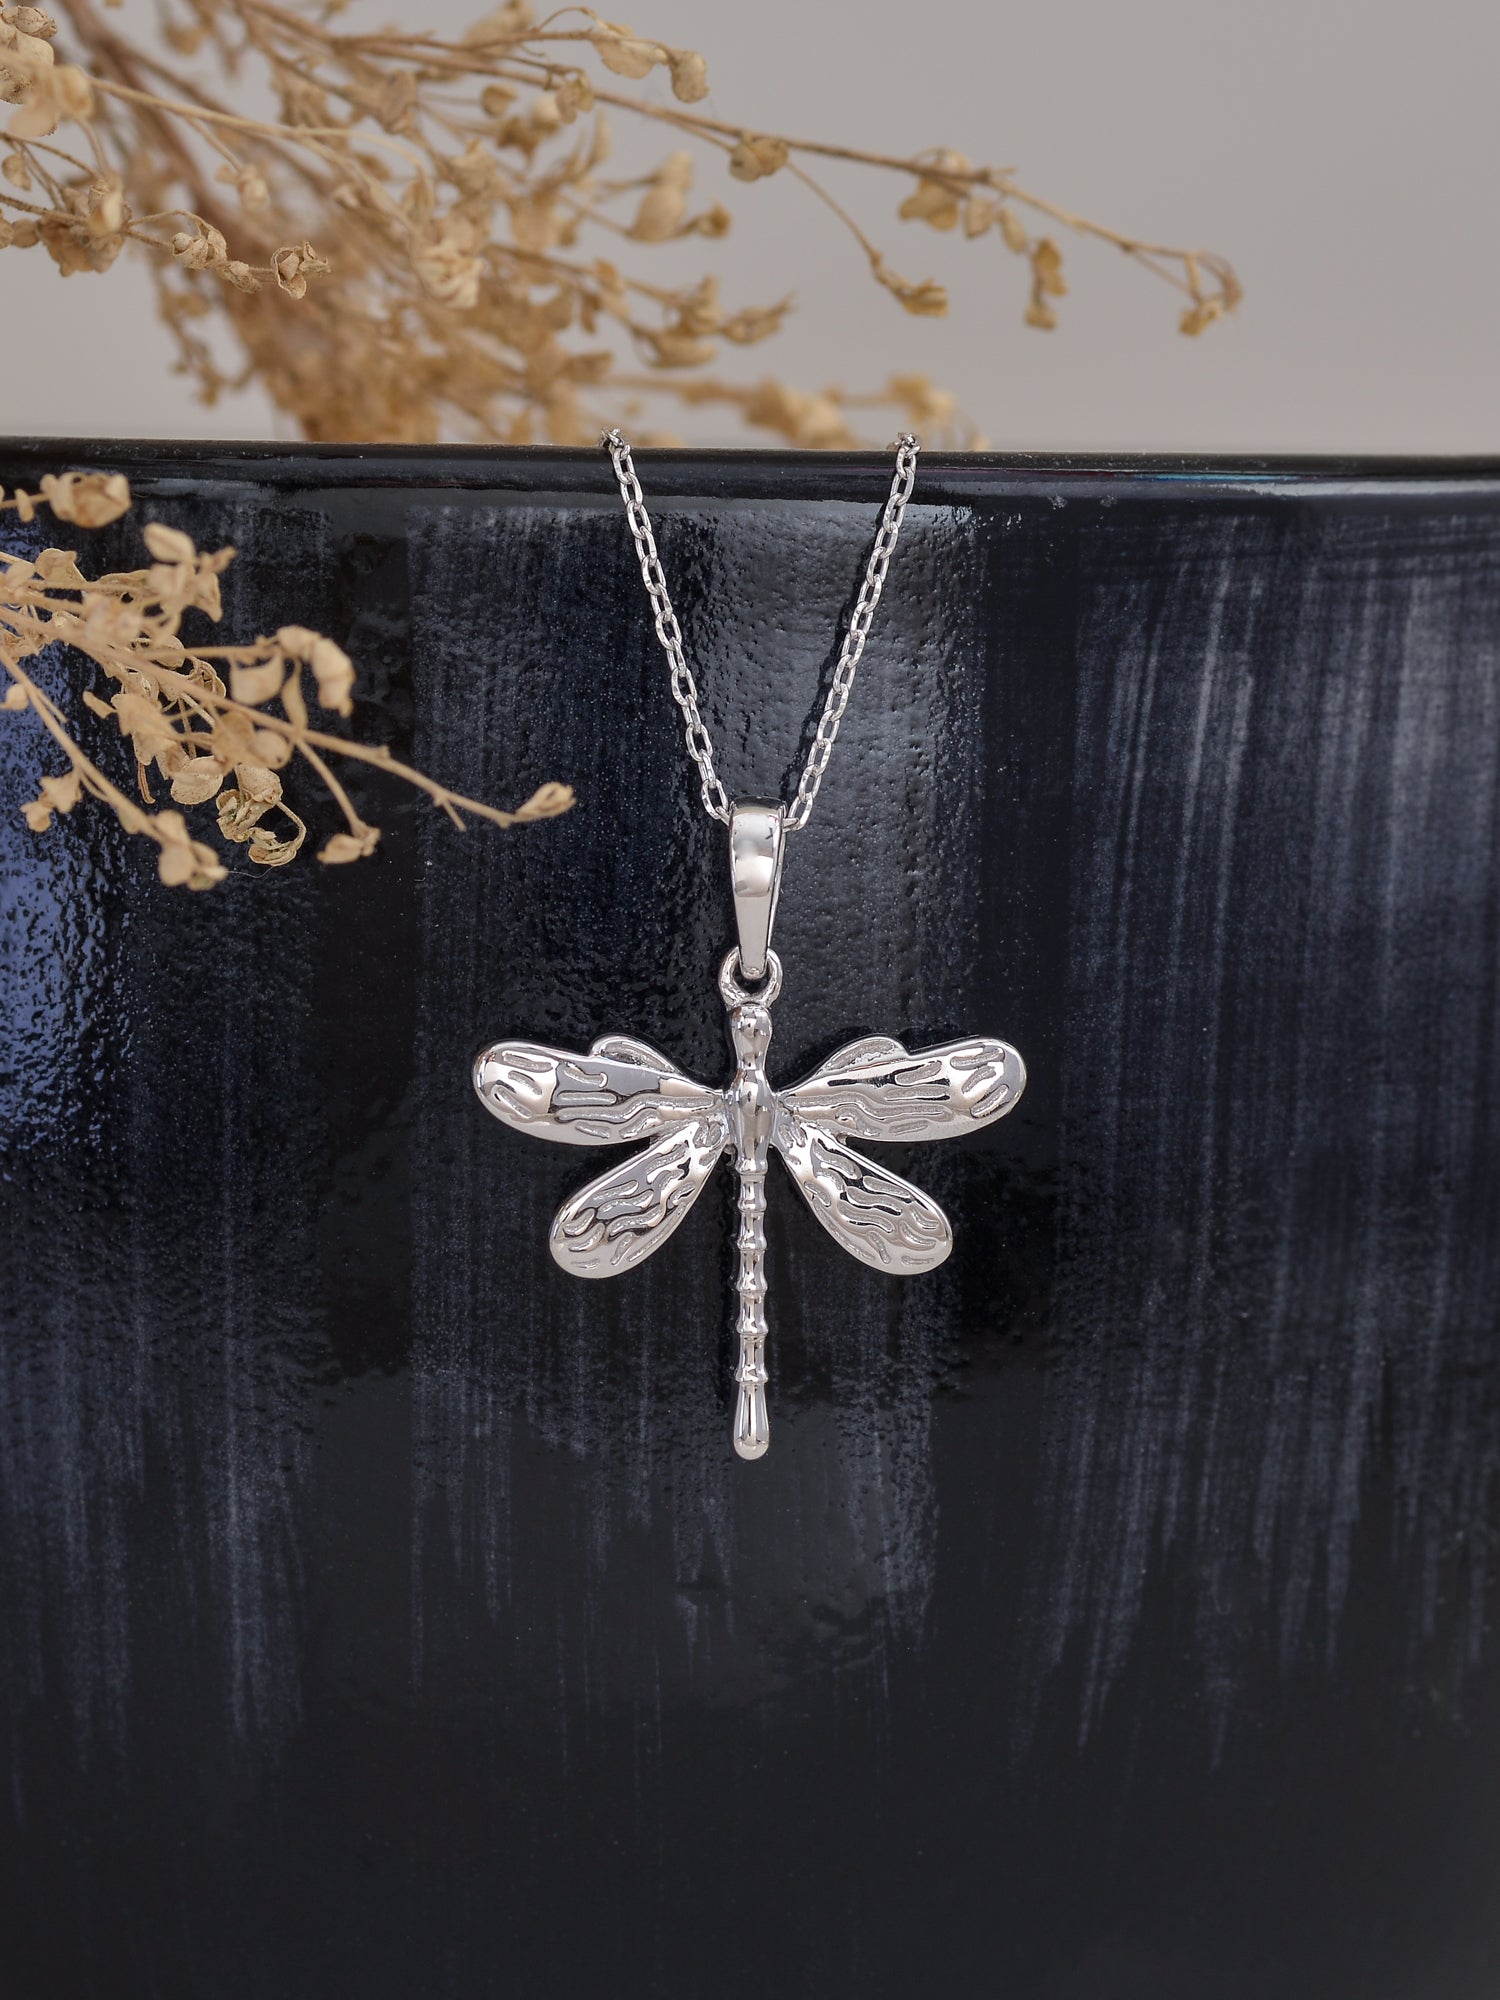 PURE 925 STERLING SILVER BUTTERFLY PENDANT WITH CHAIN FOR WOMEN